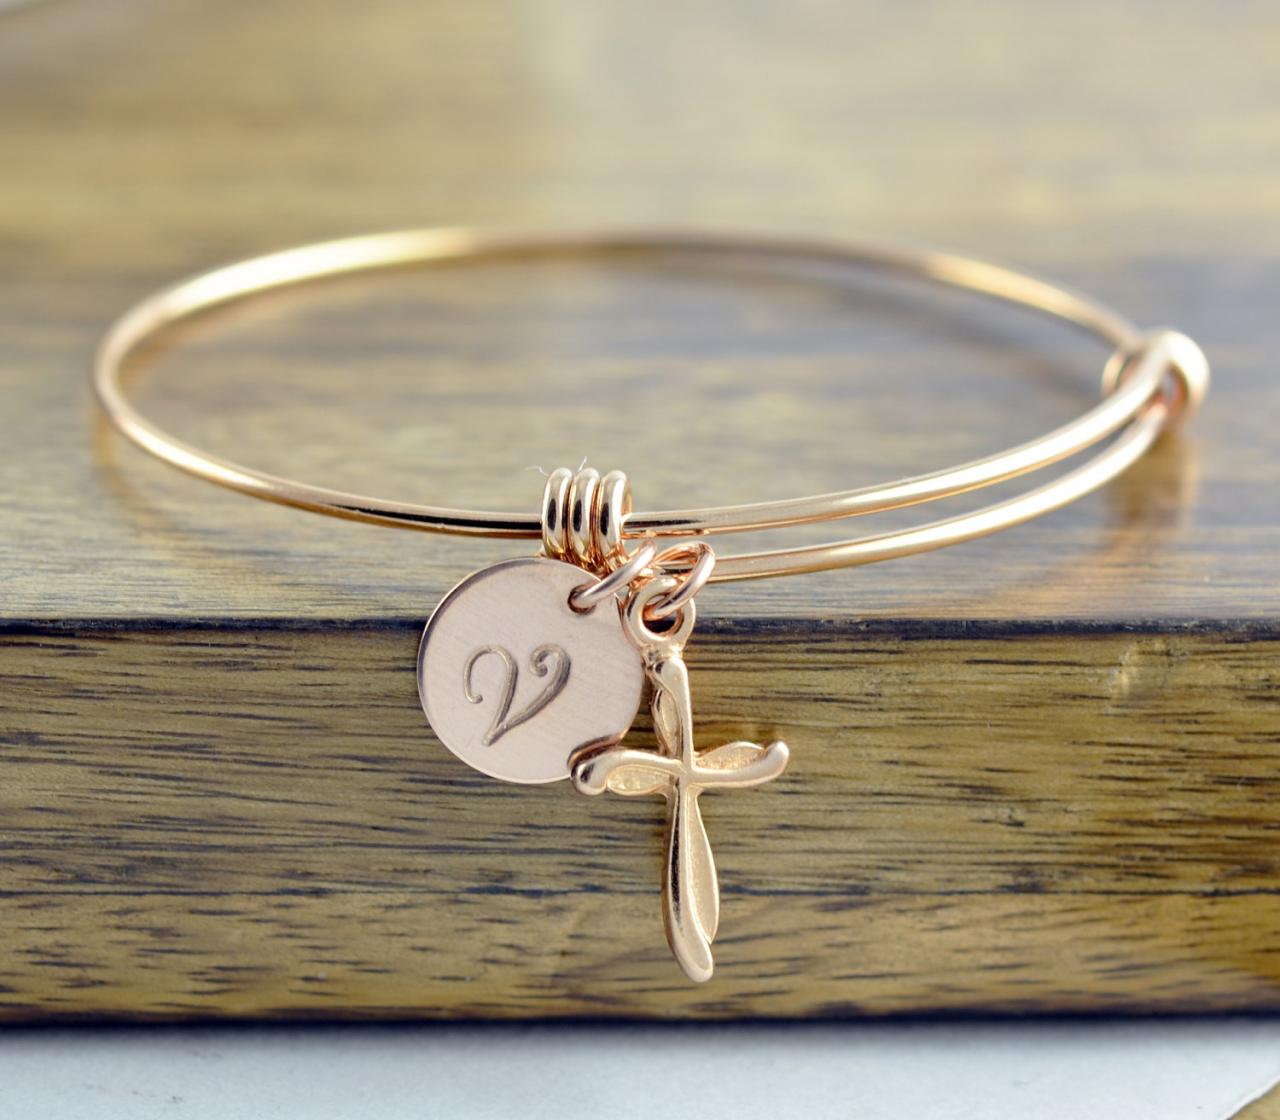 Rose Gold Cross Bracelet -personalized Initial Bracelet, Personalized Hand Stamped Bracelet, Rose Gold Jewelry, Cross Bracelet, Gift For Her